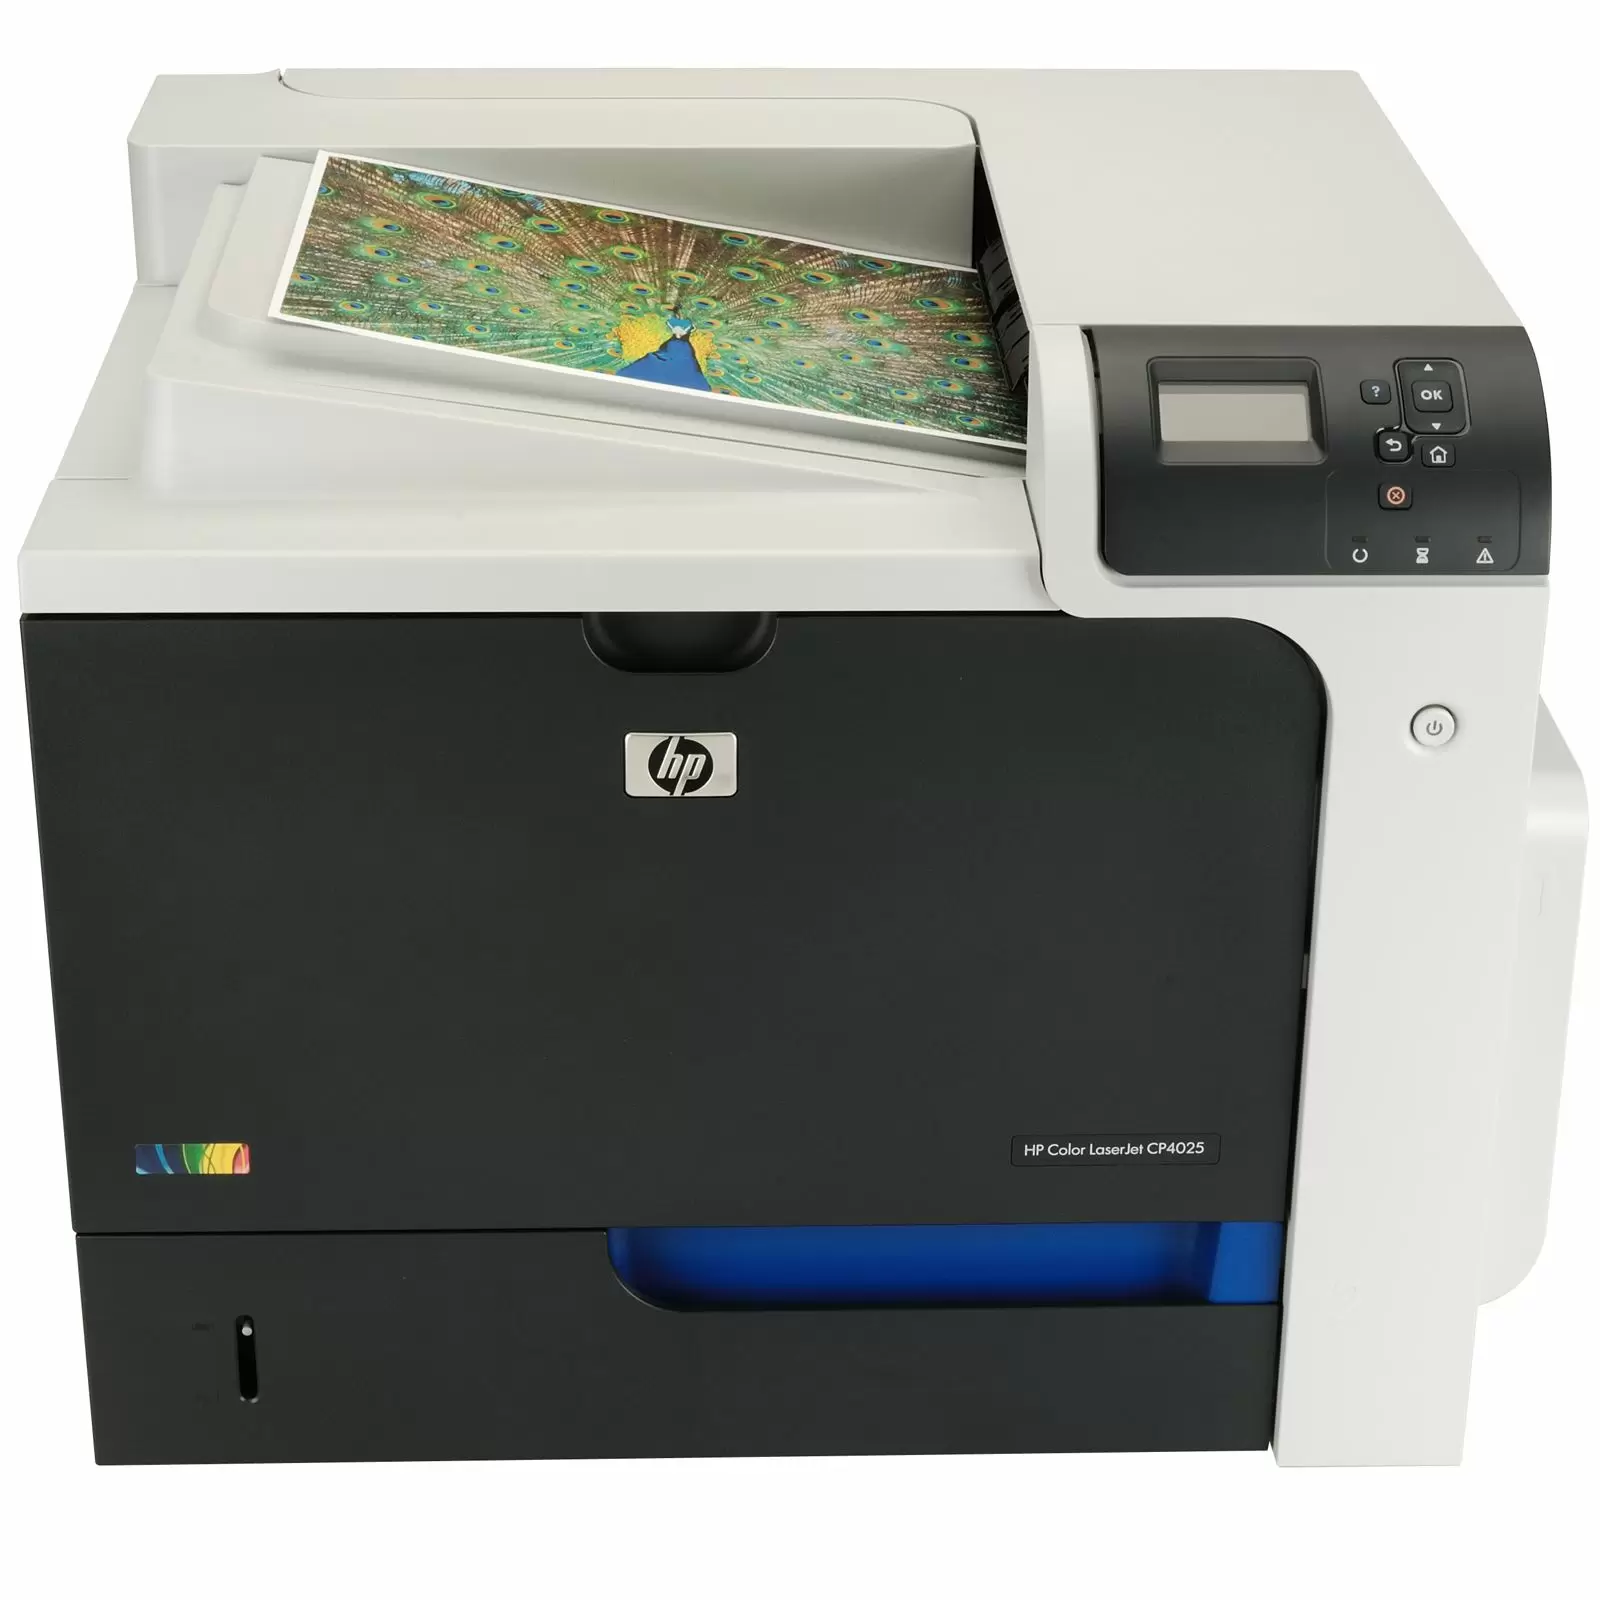 HP Colour Laserjet CP4025N Price in Pakistan, Specifications, Features